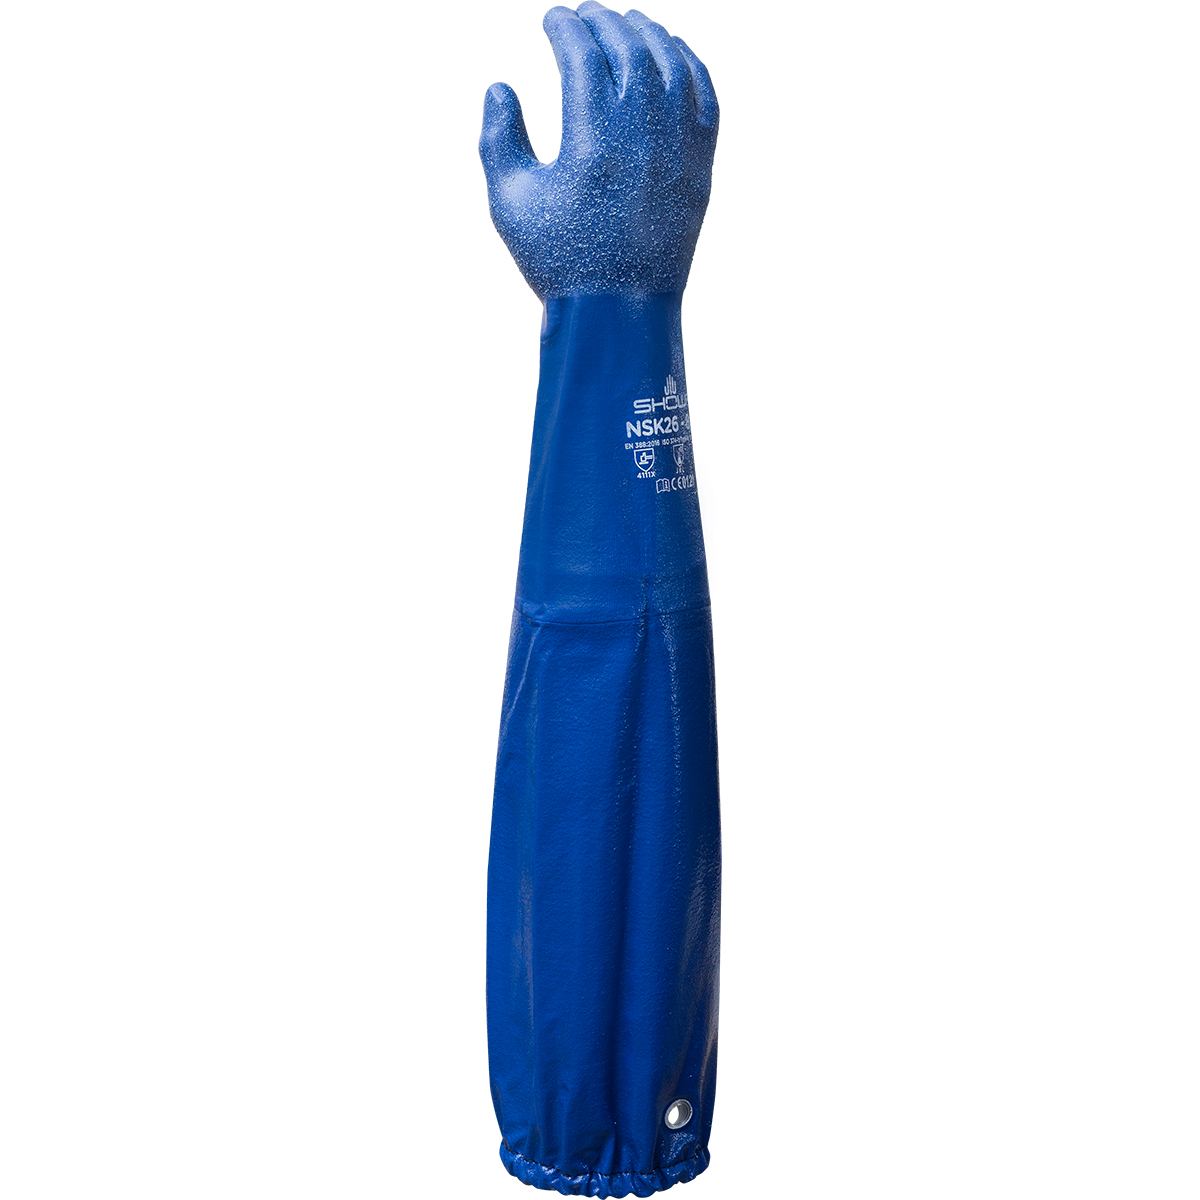 Chemical resistant nitrile, fully coated 26" extended gauntlet, royal blue, rough finish, cotton interlock liner, extra large